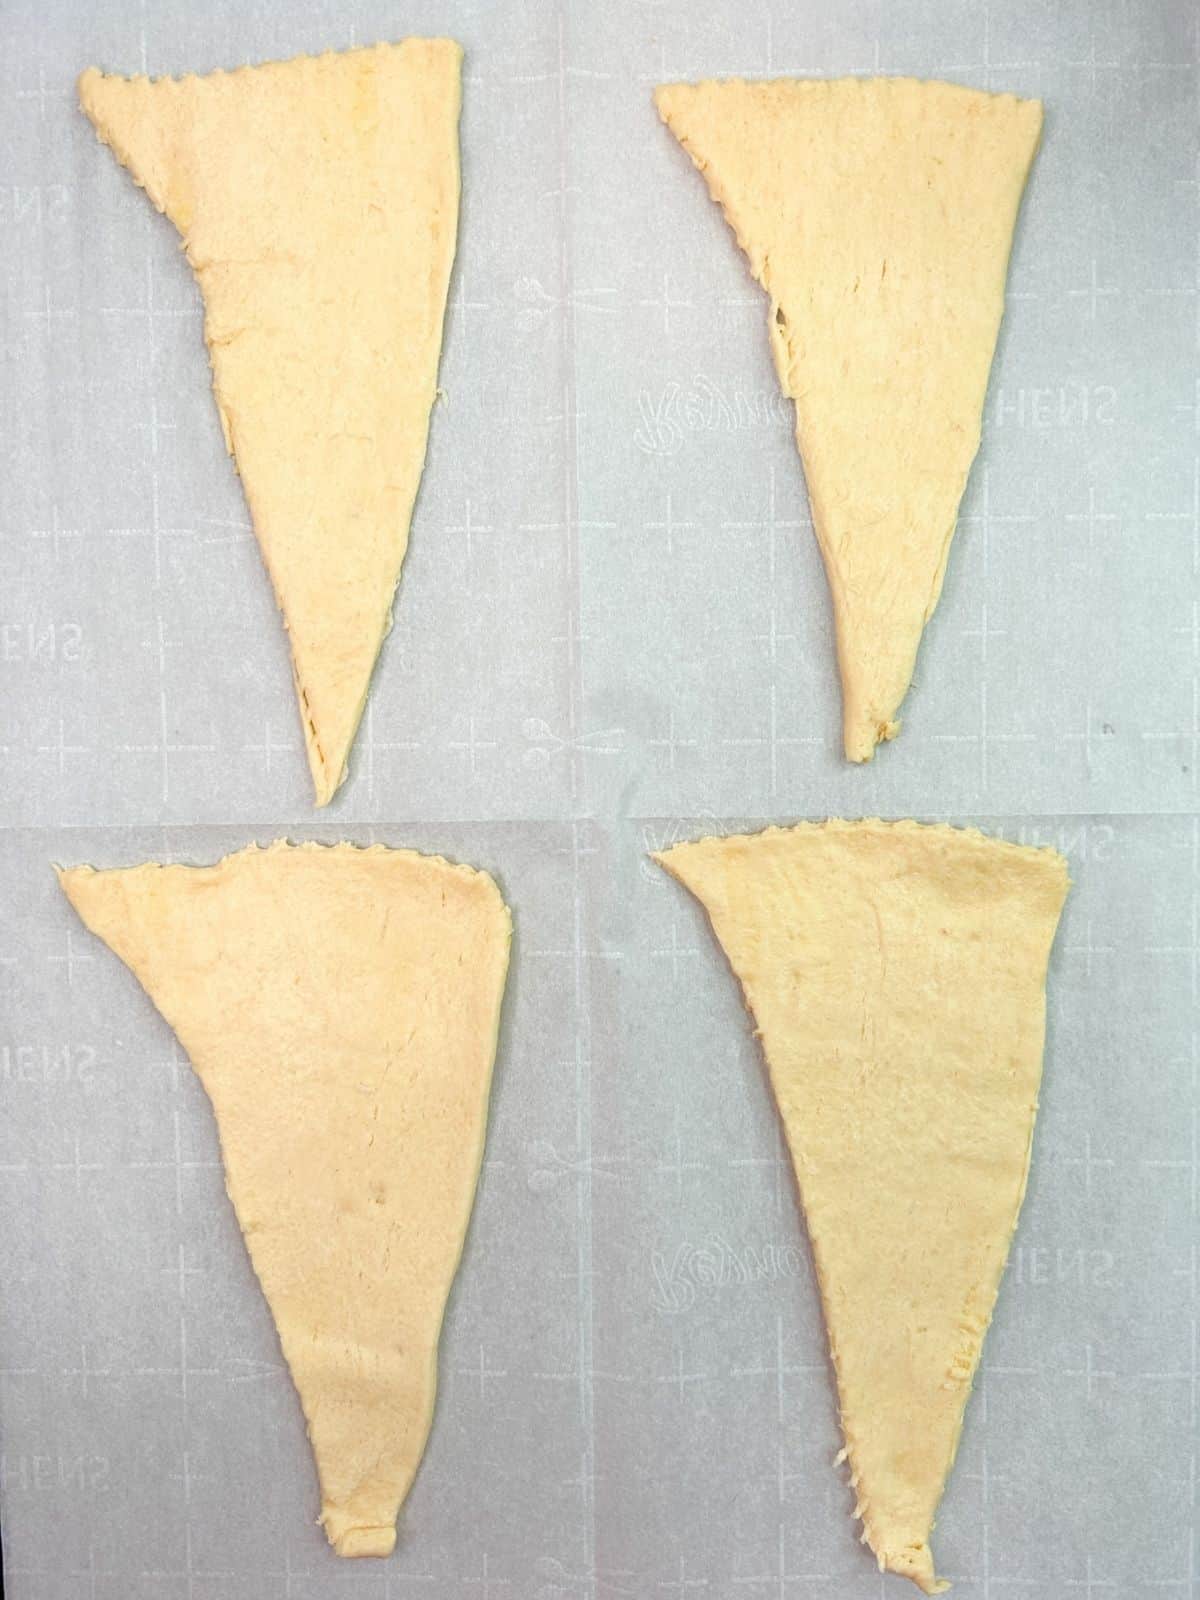 4 triangle crescent rolls on parchment paper.